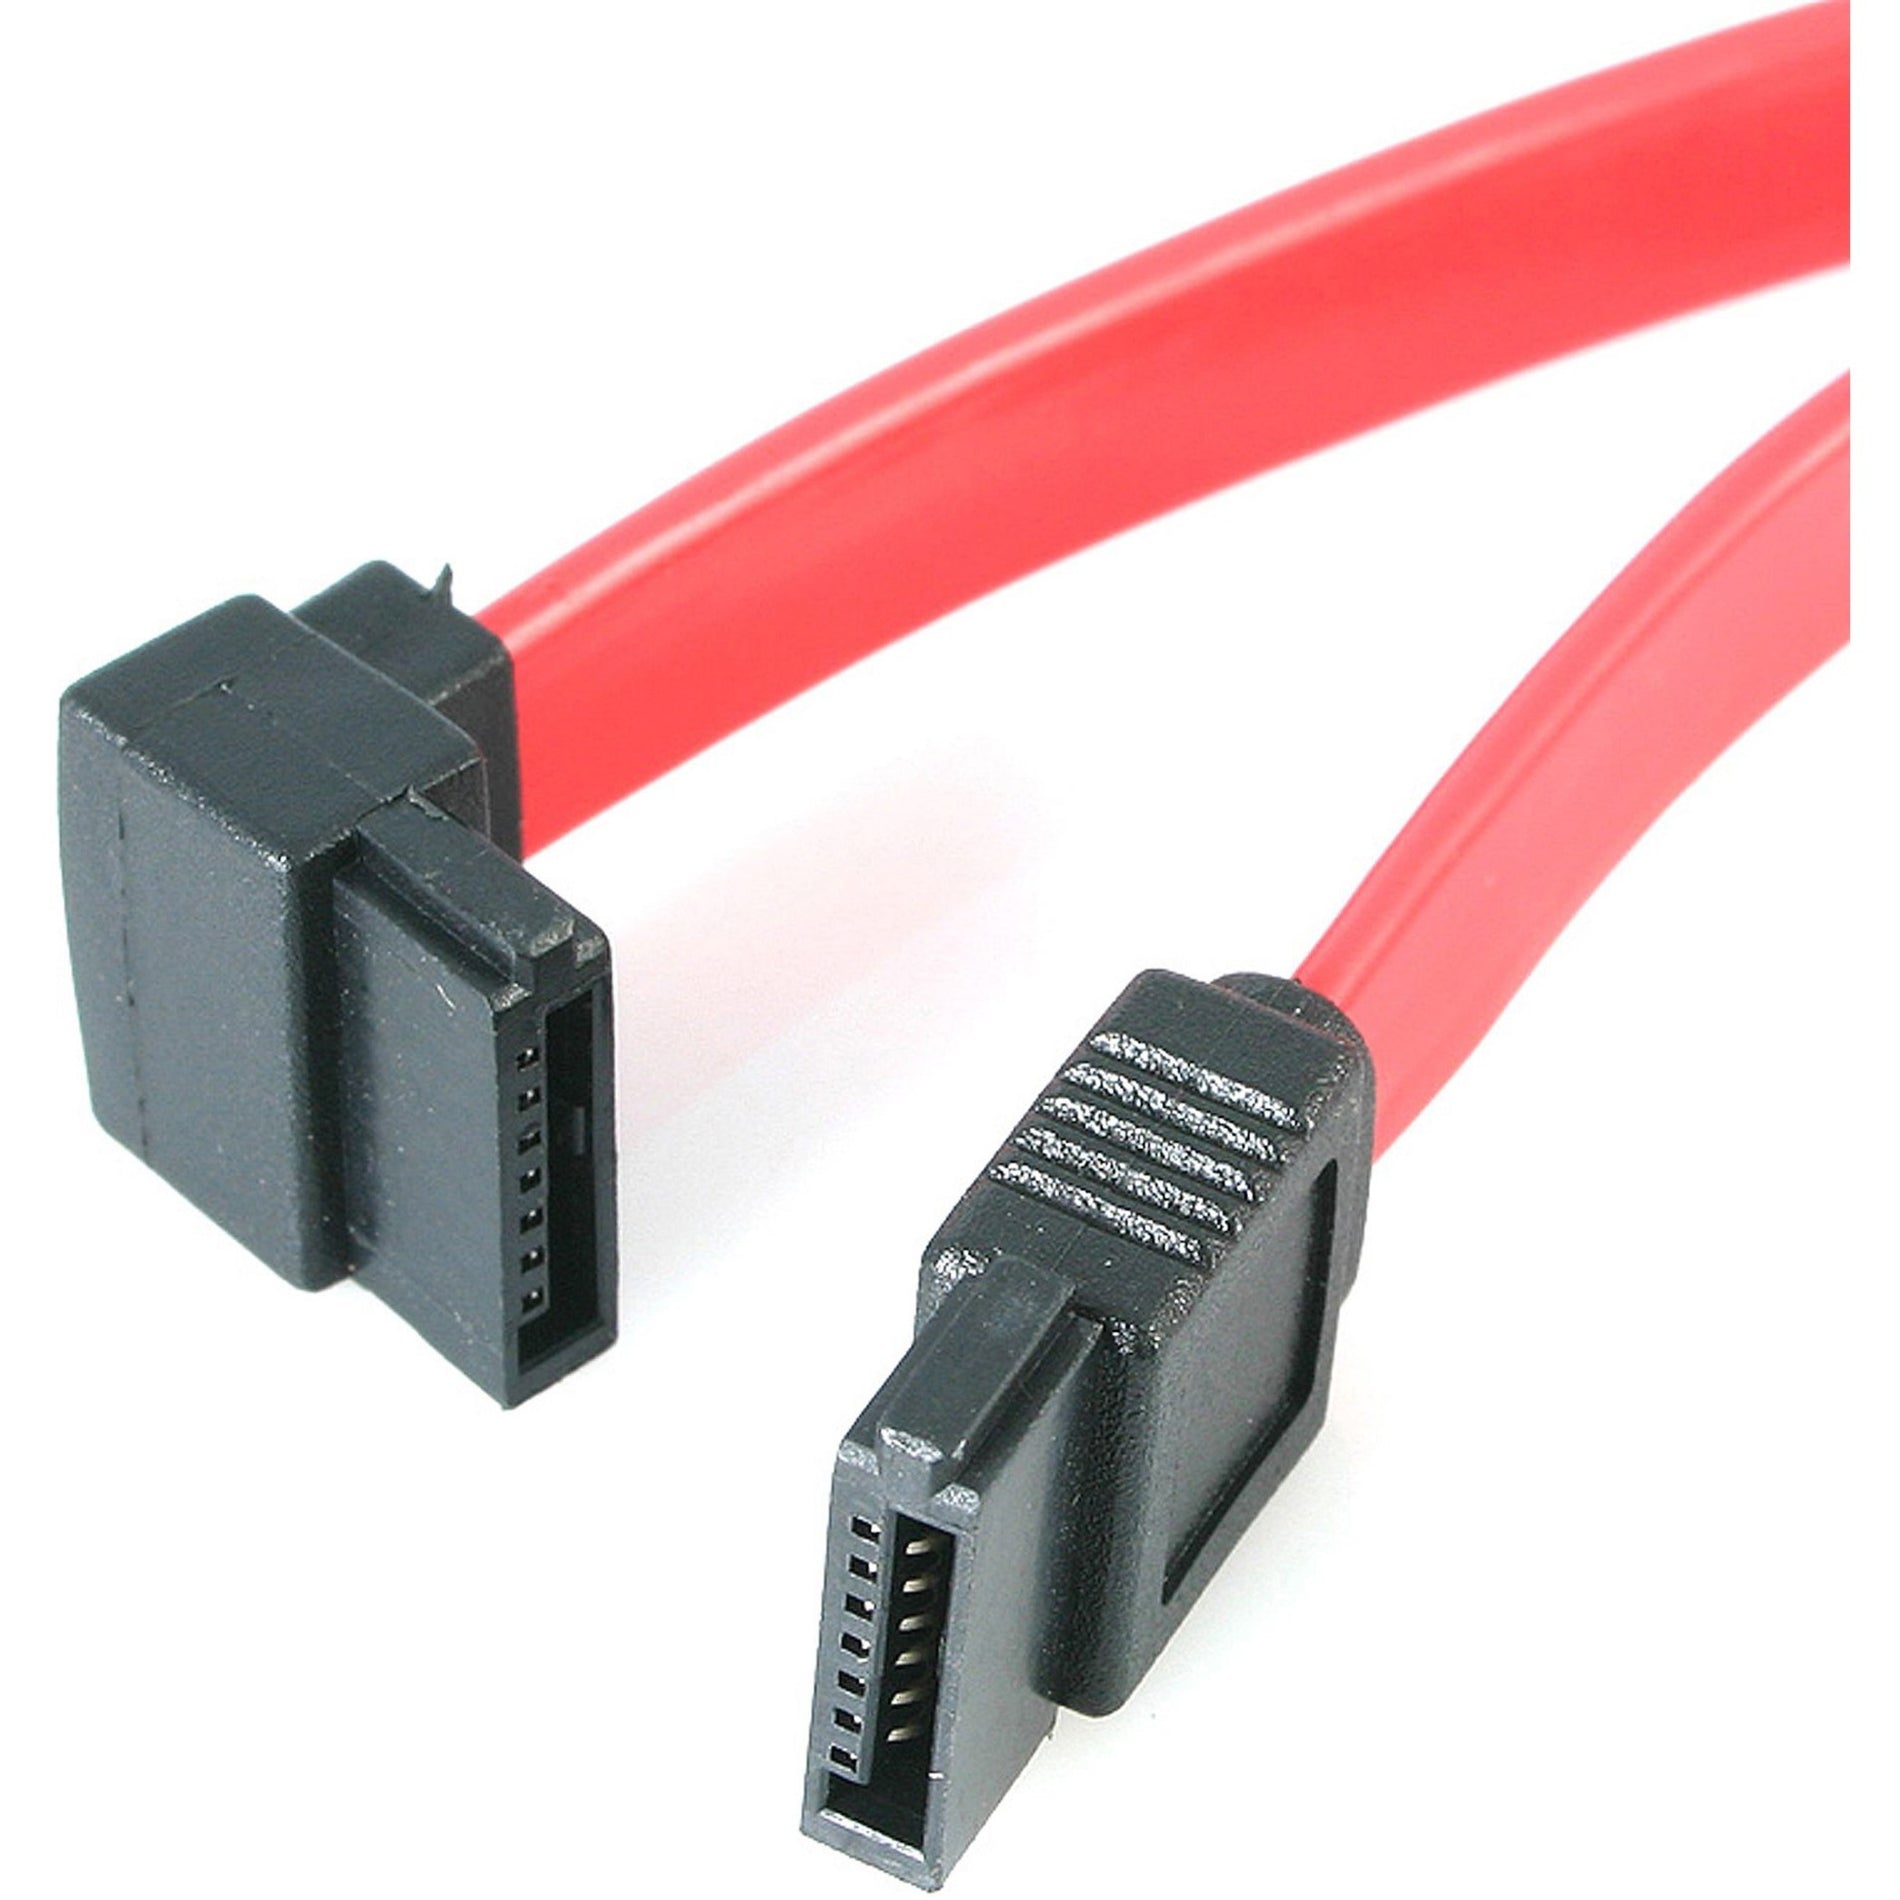 StarTech.com SATA18LA1 18in SATA to Left Angle SATA Cable, 90° Angled Connector, 1.50 ft Length, 6 Gbit/s Data Transfer Rate